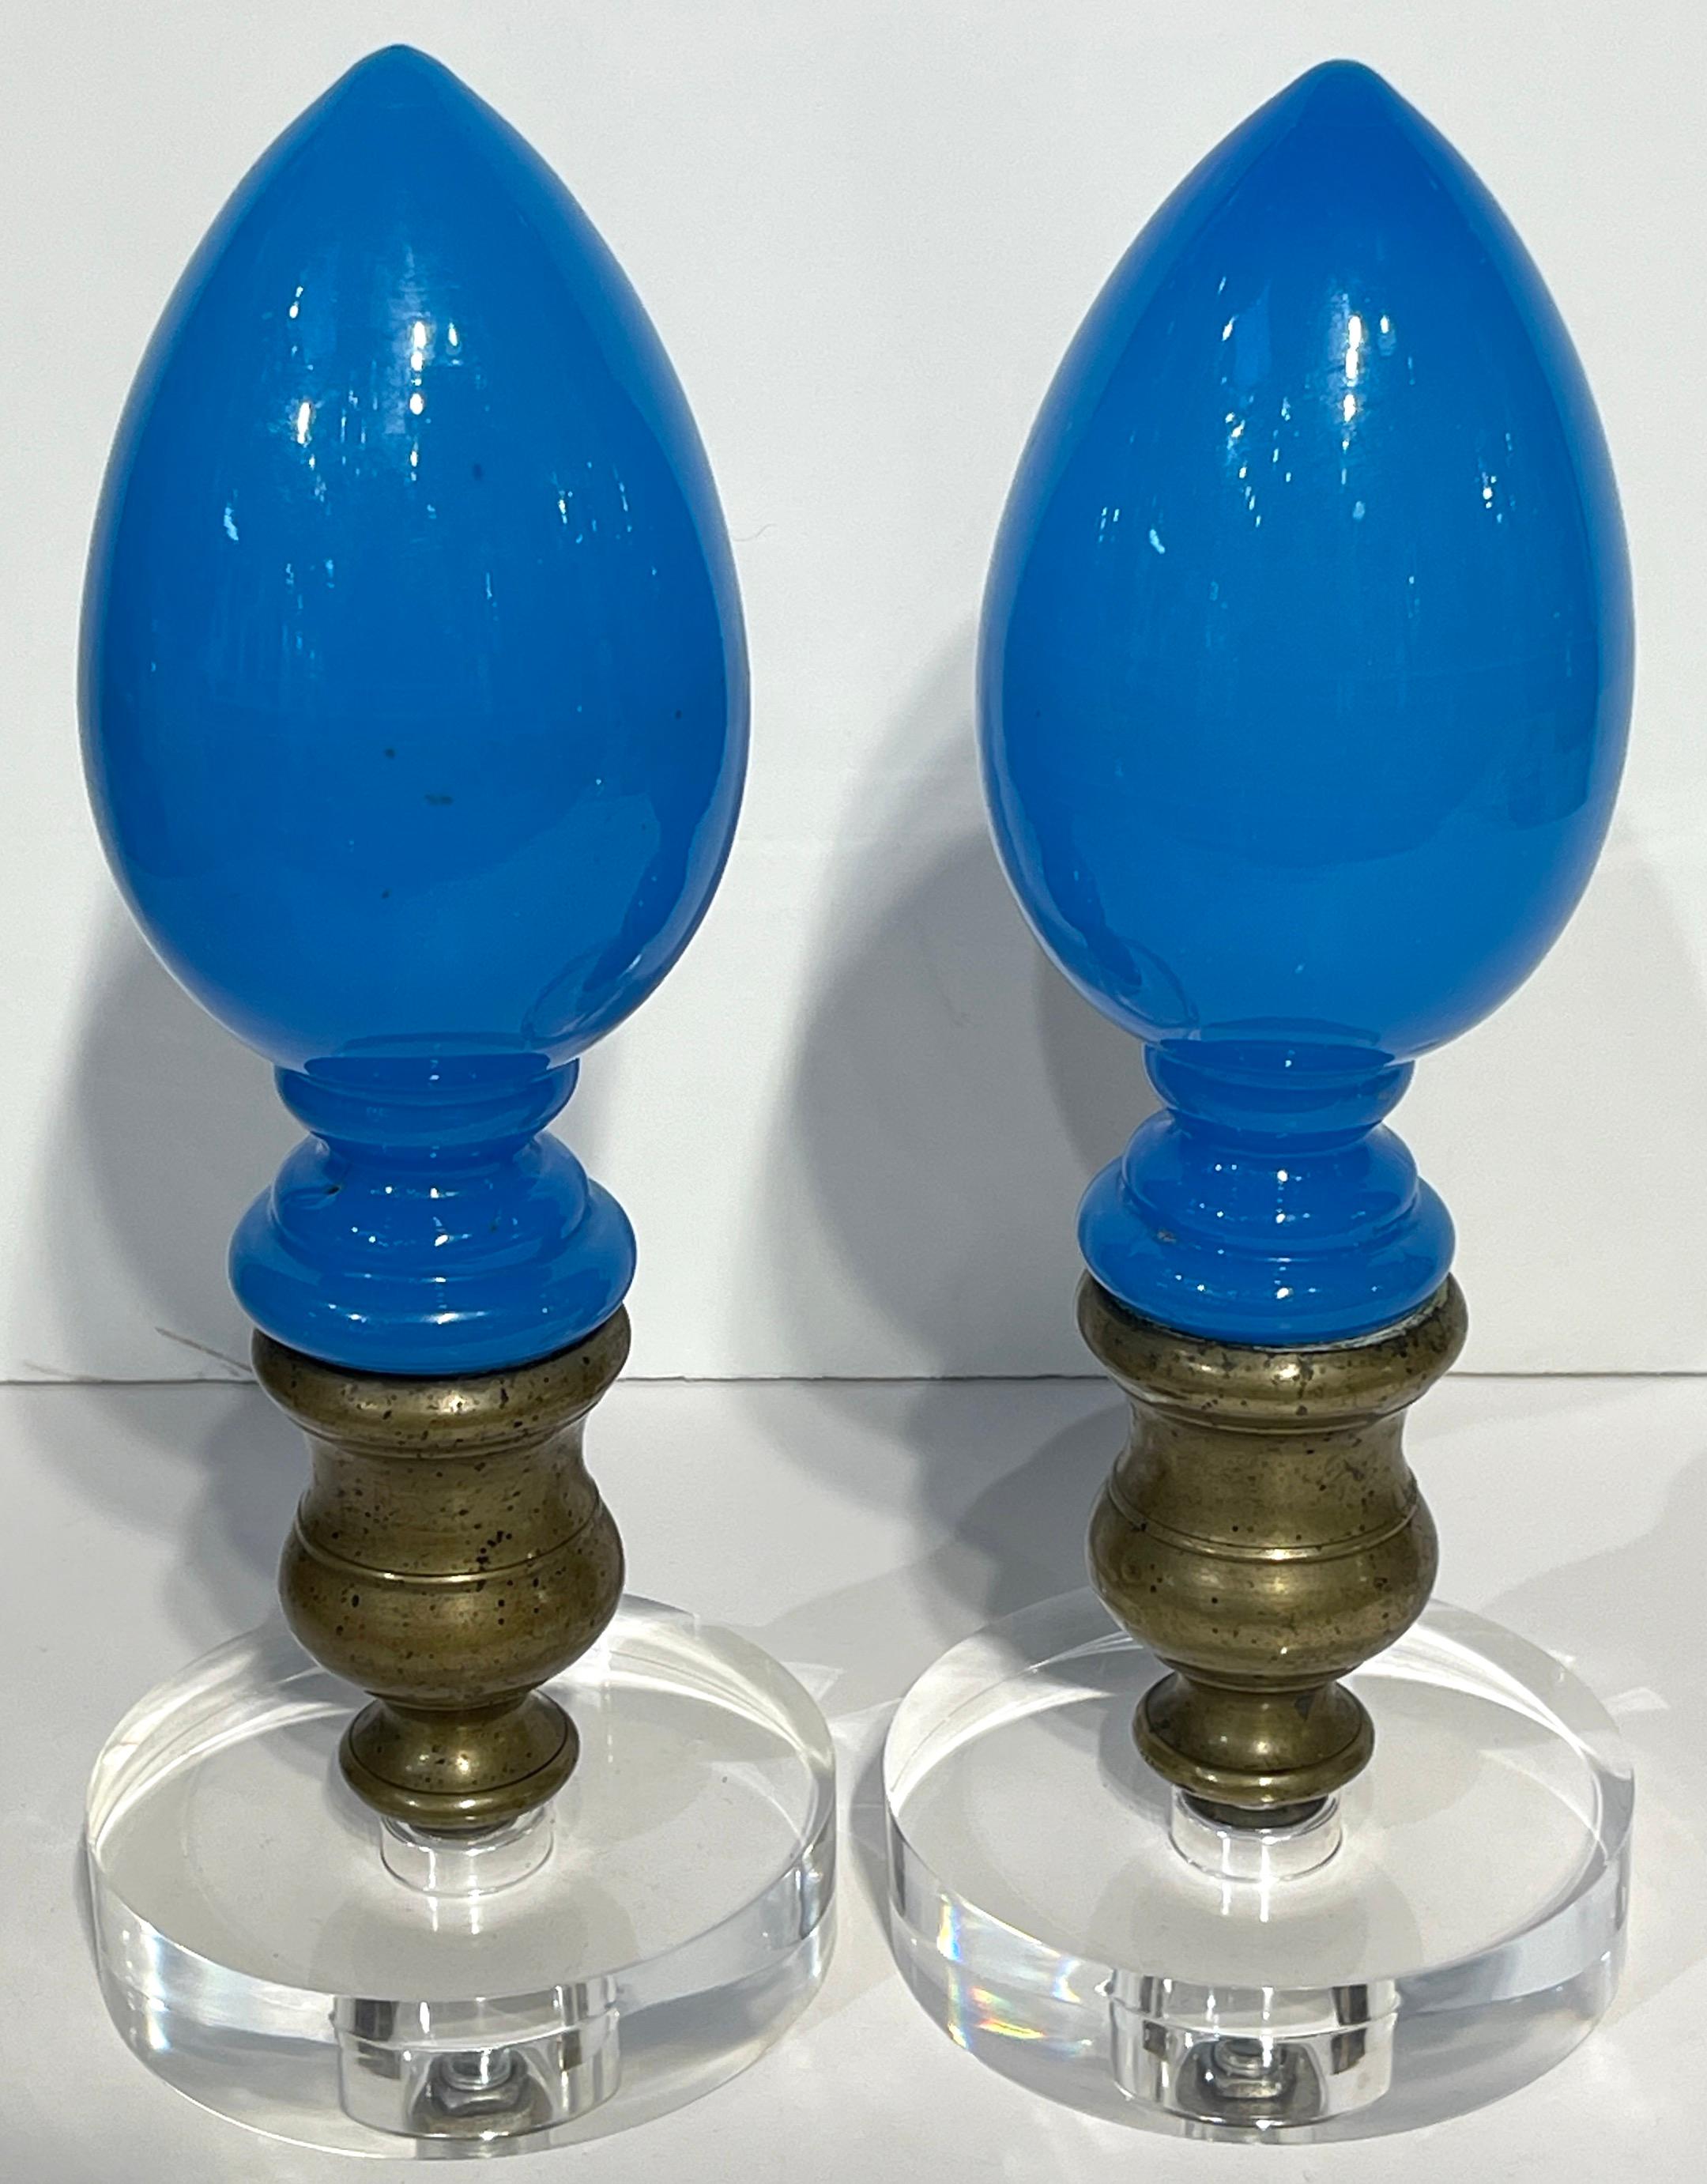 Two Napoleon III Blue Opaline & Lucite Newel Post, Sold Individually 
France, Circa 1850

Enhance your interior with these exquisite Napoleon III Blue Opaline & Lucite Newel Posts, each a unique piece of 19th-century French workmanship. Dating back